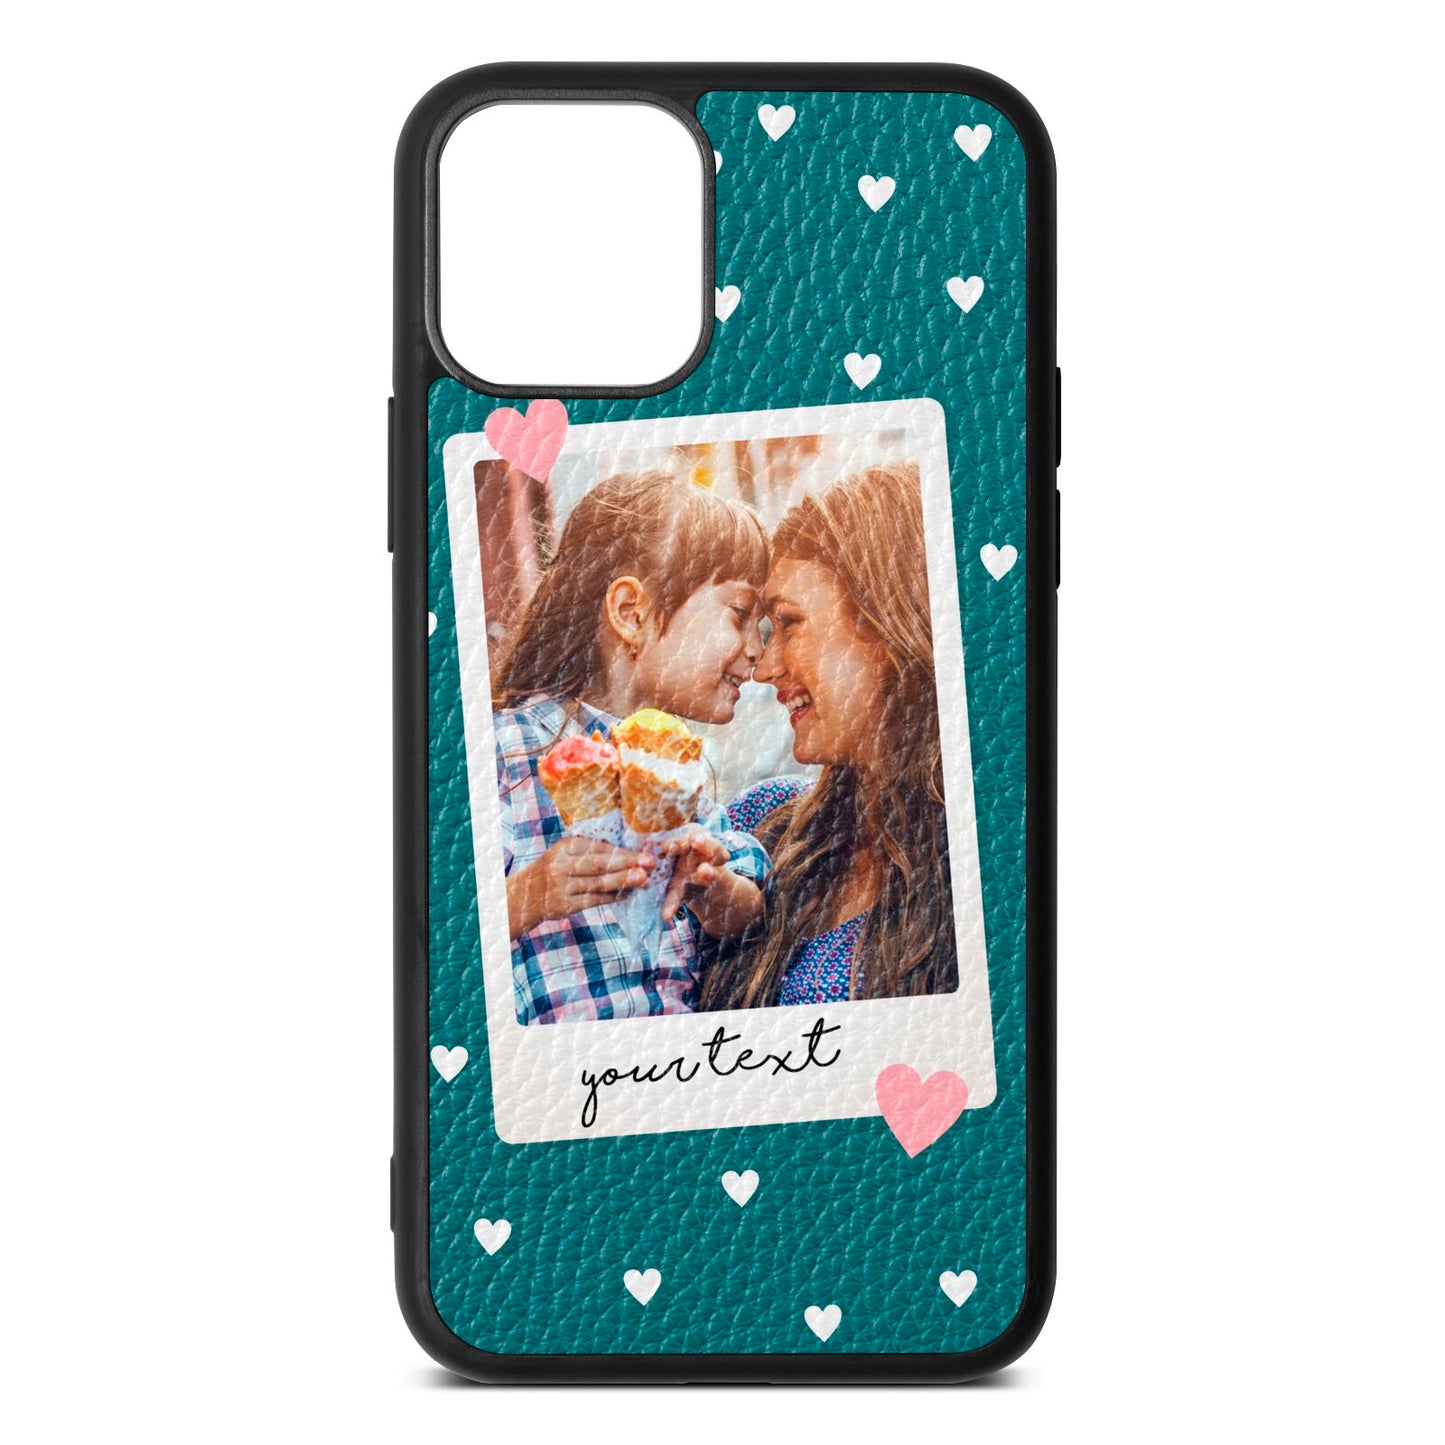 Personalised Photo Love Hearts Green Pebble Leather iPhone 11 Case